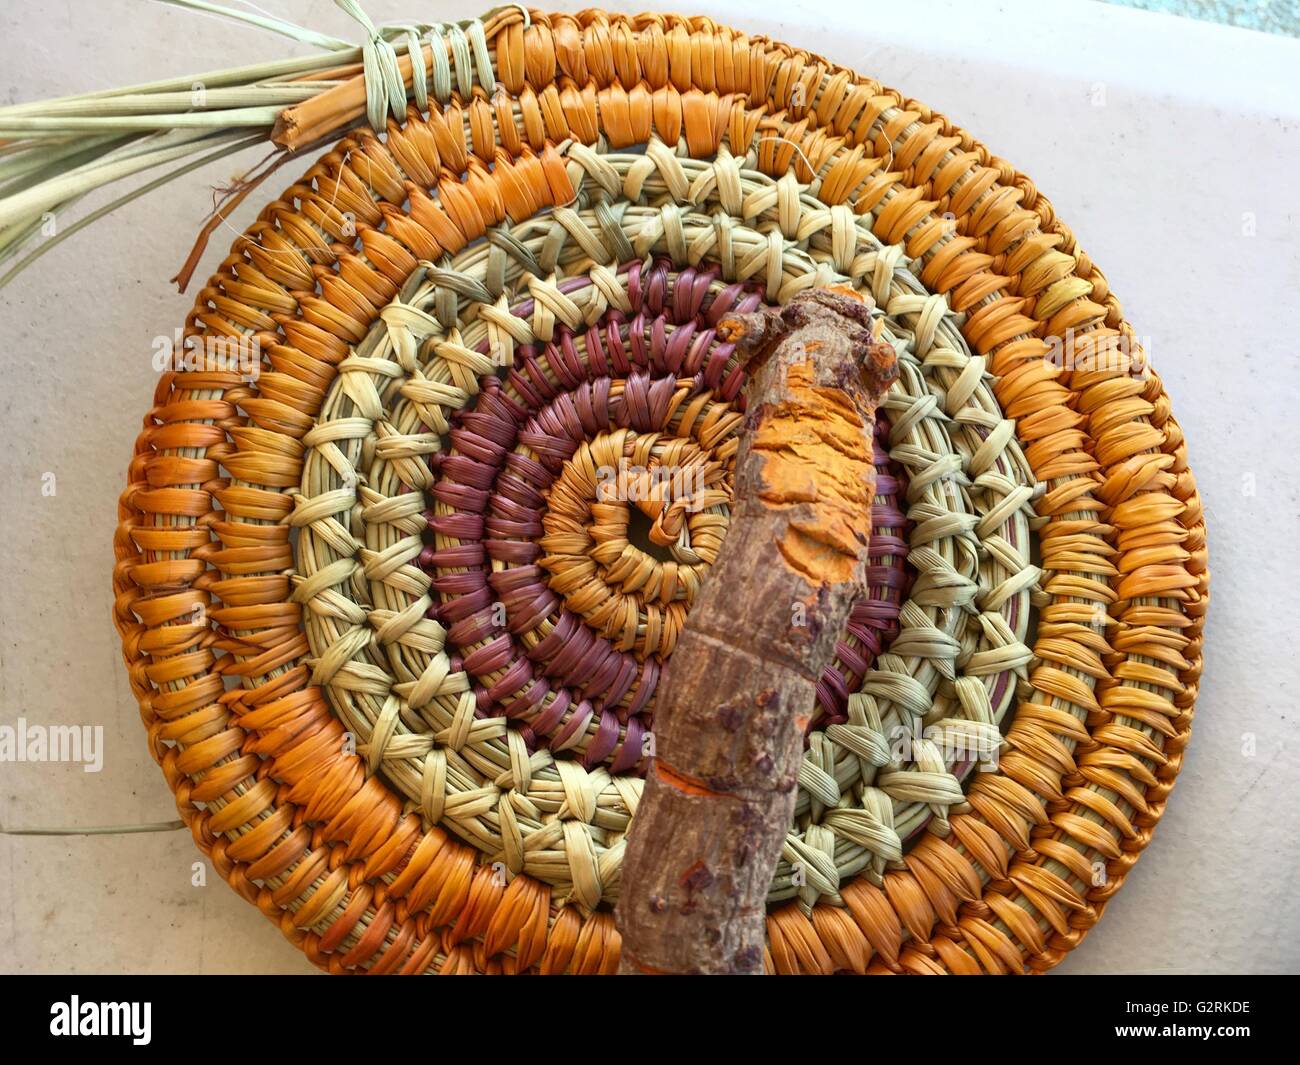 Yellow root used to dye the baskets made by the Aboriginal Jawoyn people at Katherine Gorge, Nitmiluk National Park, Australia Stock Photo